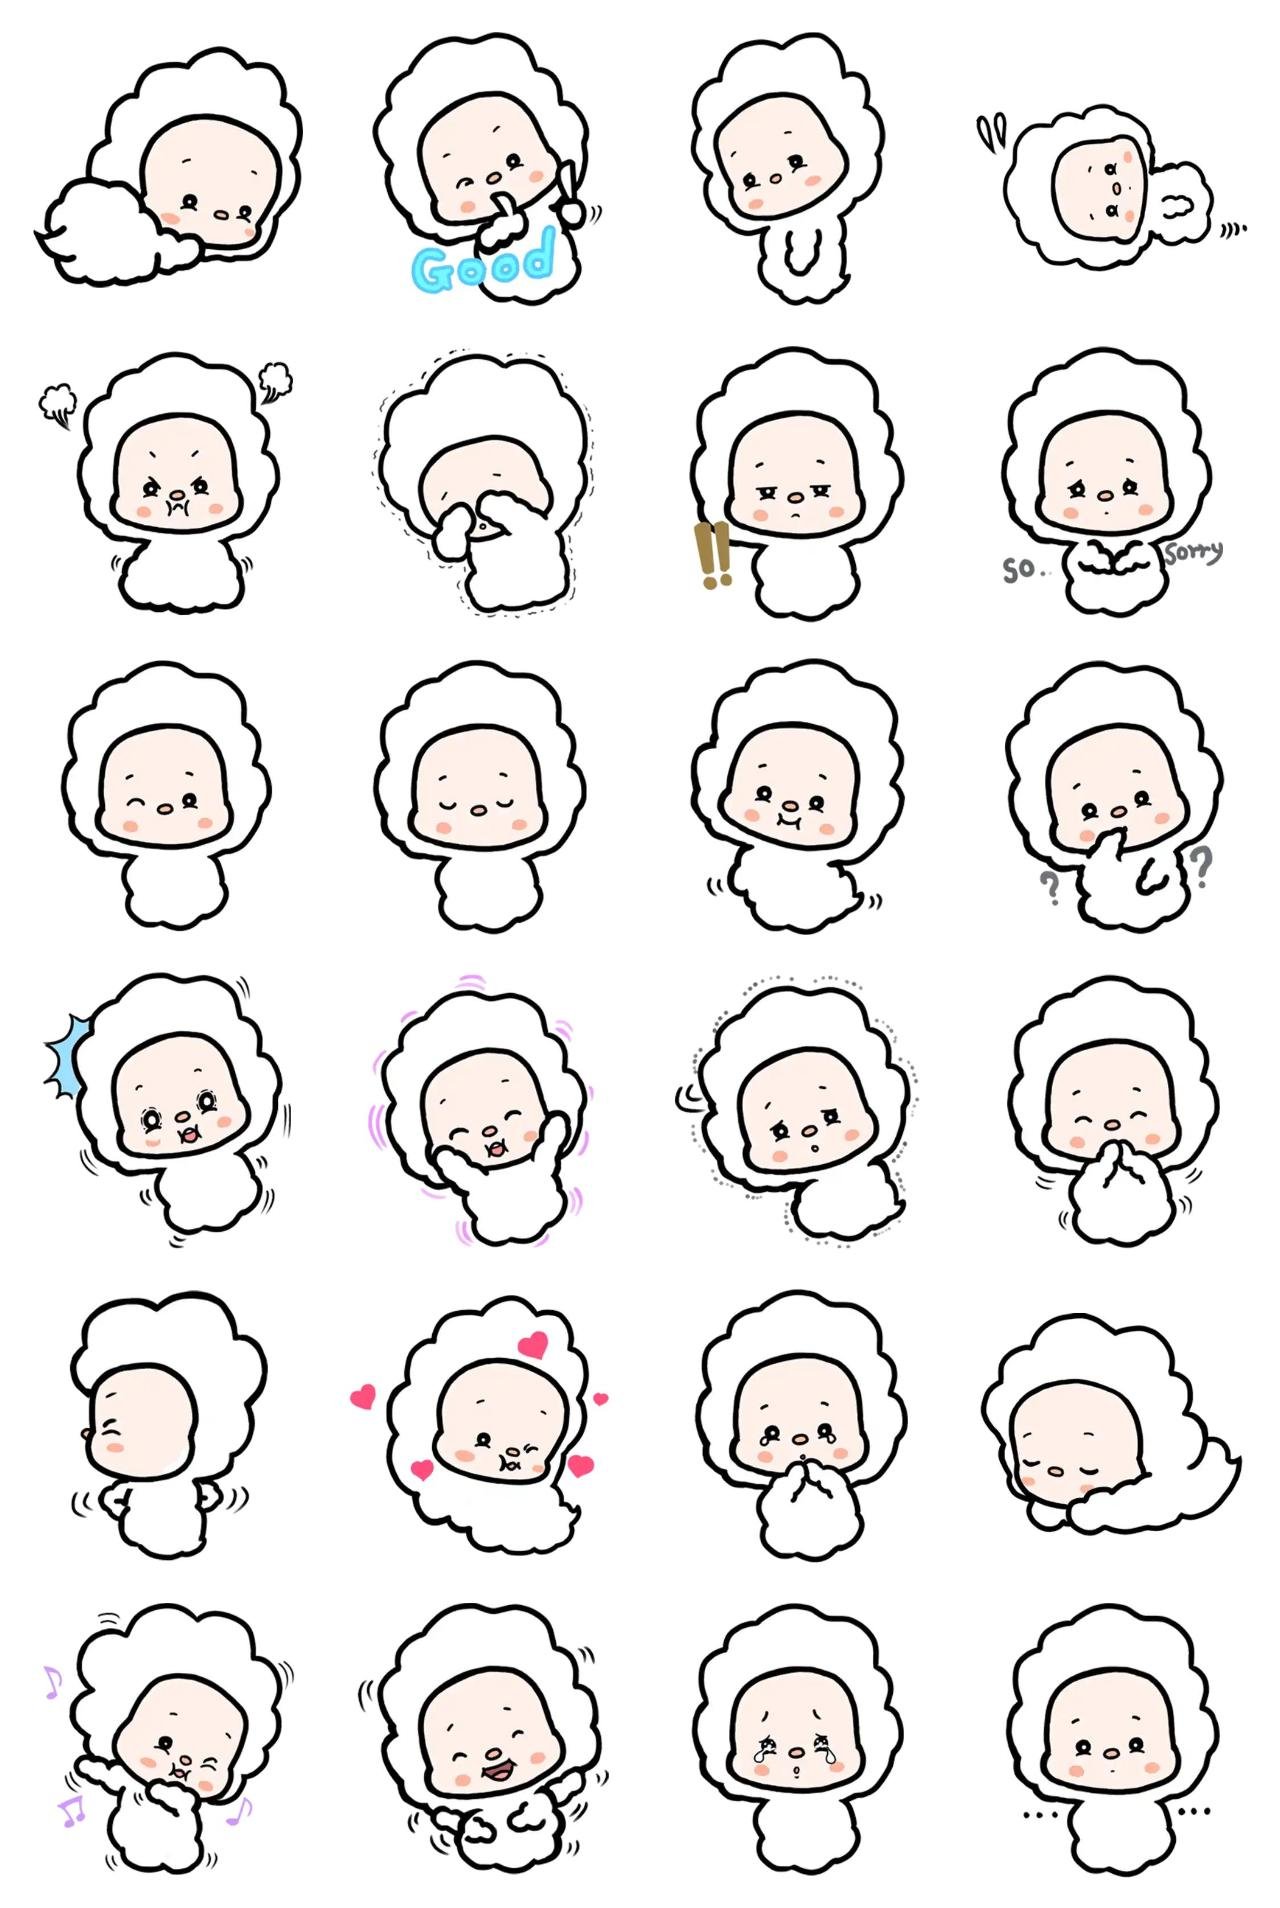 Baby cotton candy Pomi Etc. sticker pack for Whatsapp, Telegram, Signal, and others chatting and message apps